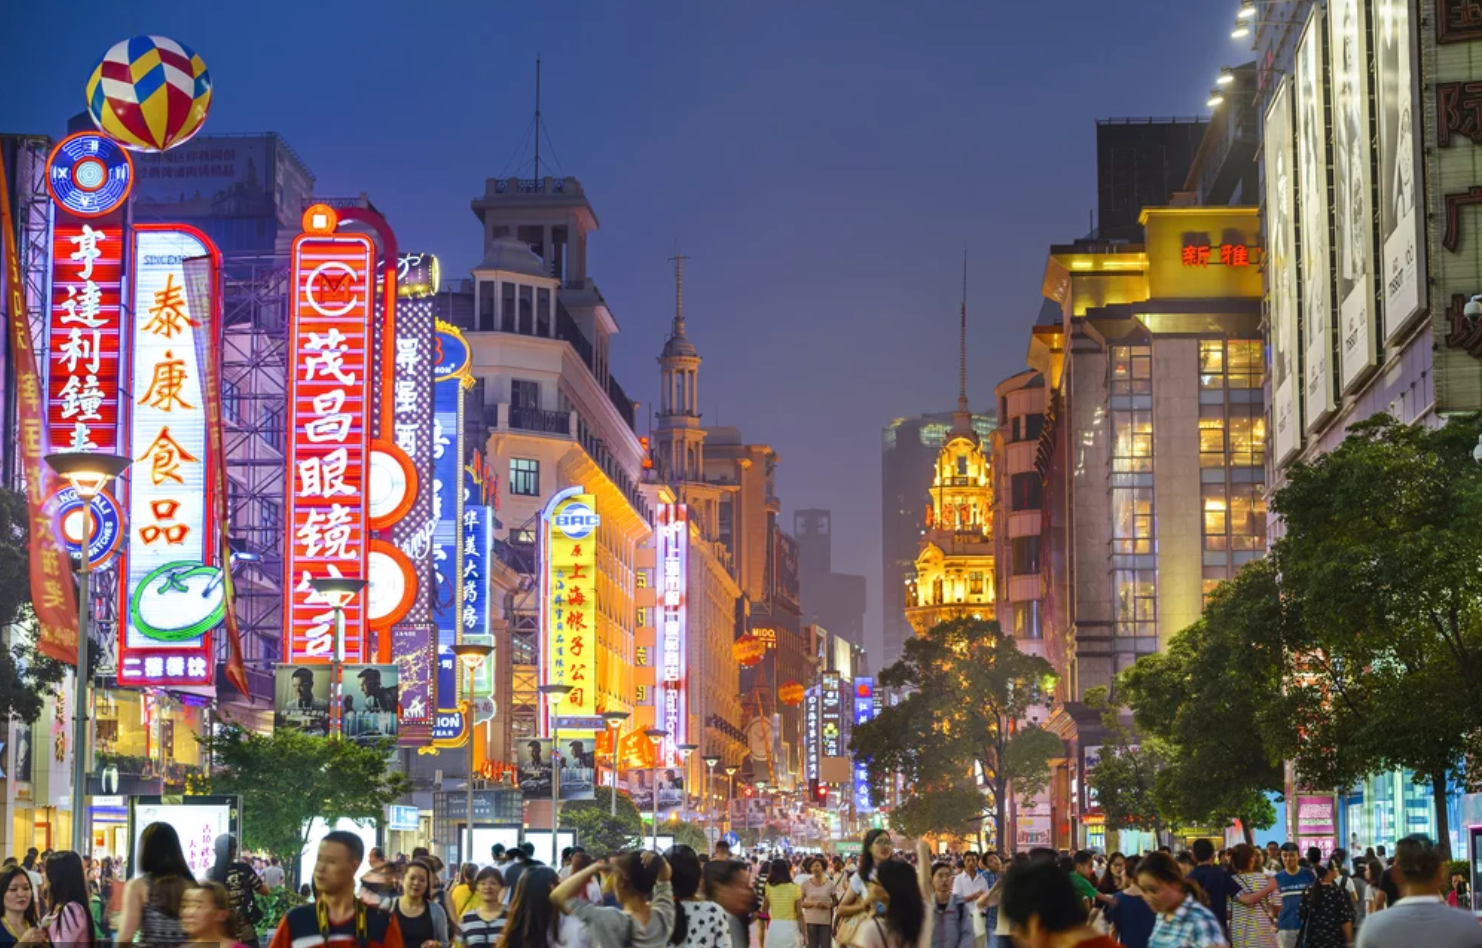 Despite an uptick in domestic retail consumption, the travel and automotive industries are still struggling to recover to pre-pandemic levels in China. Photo: Shutterstock